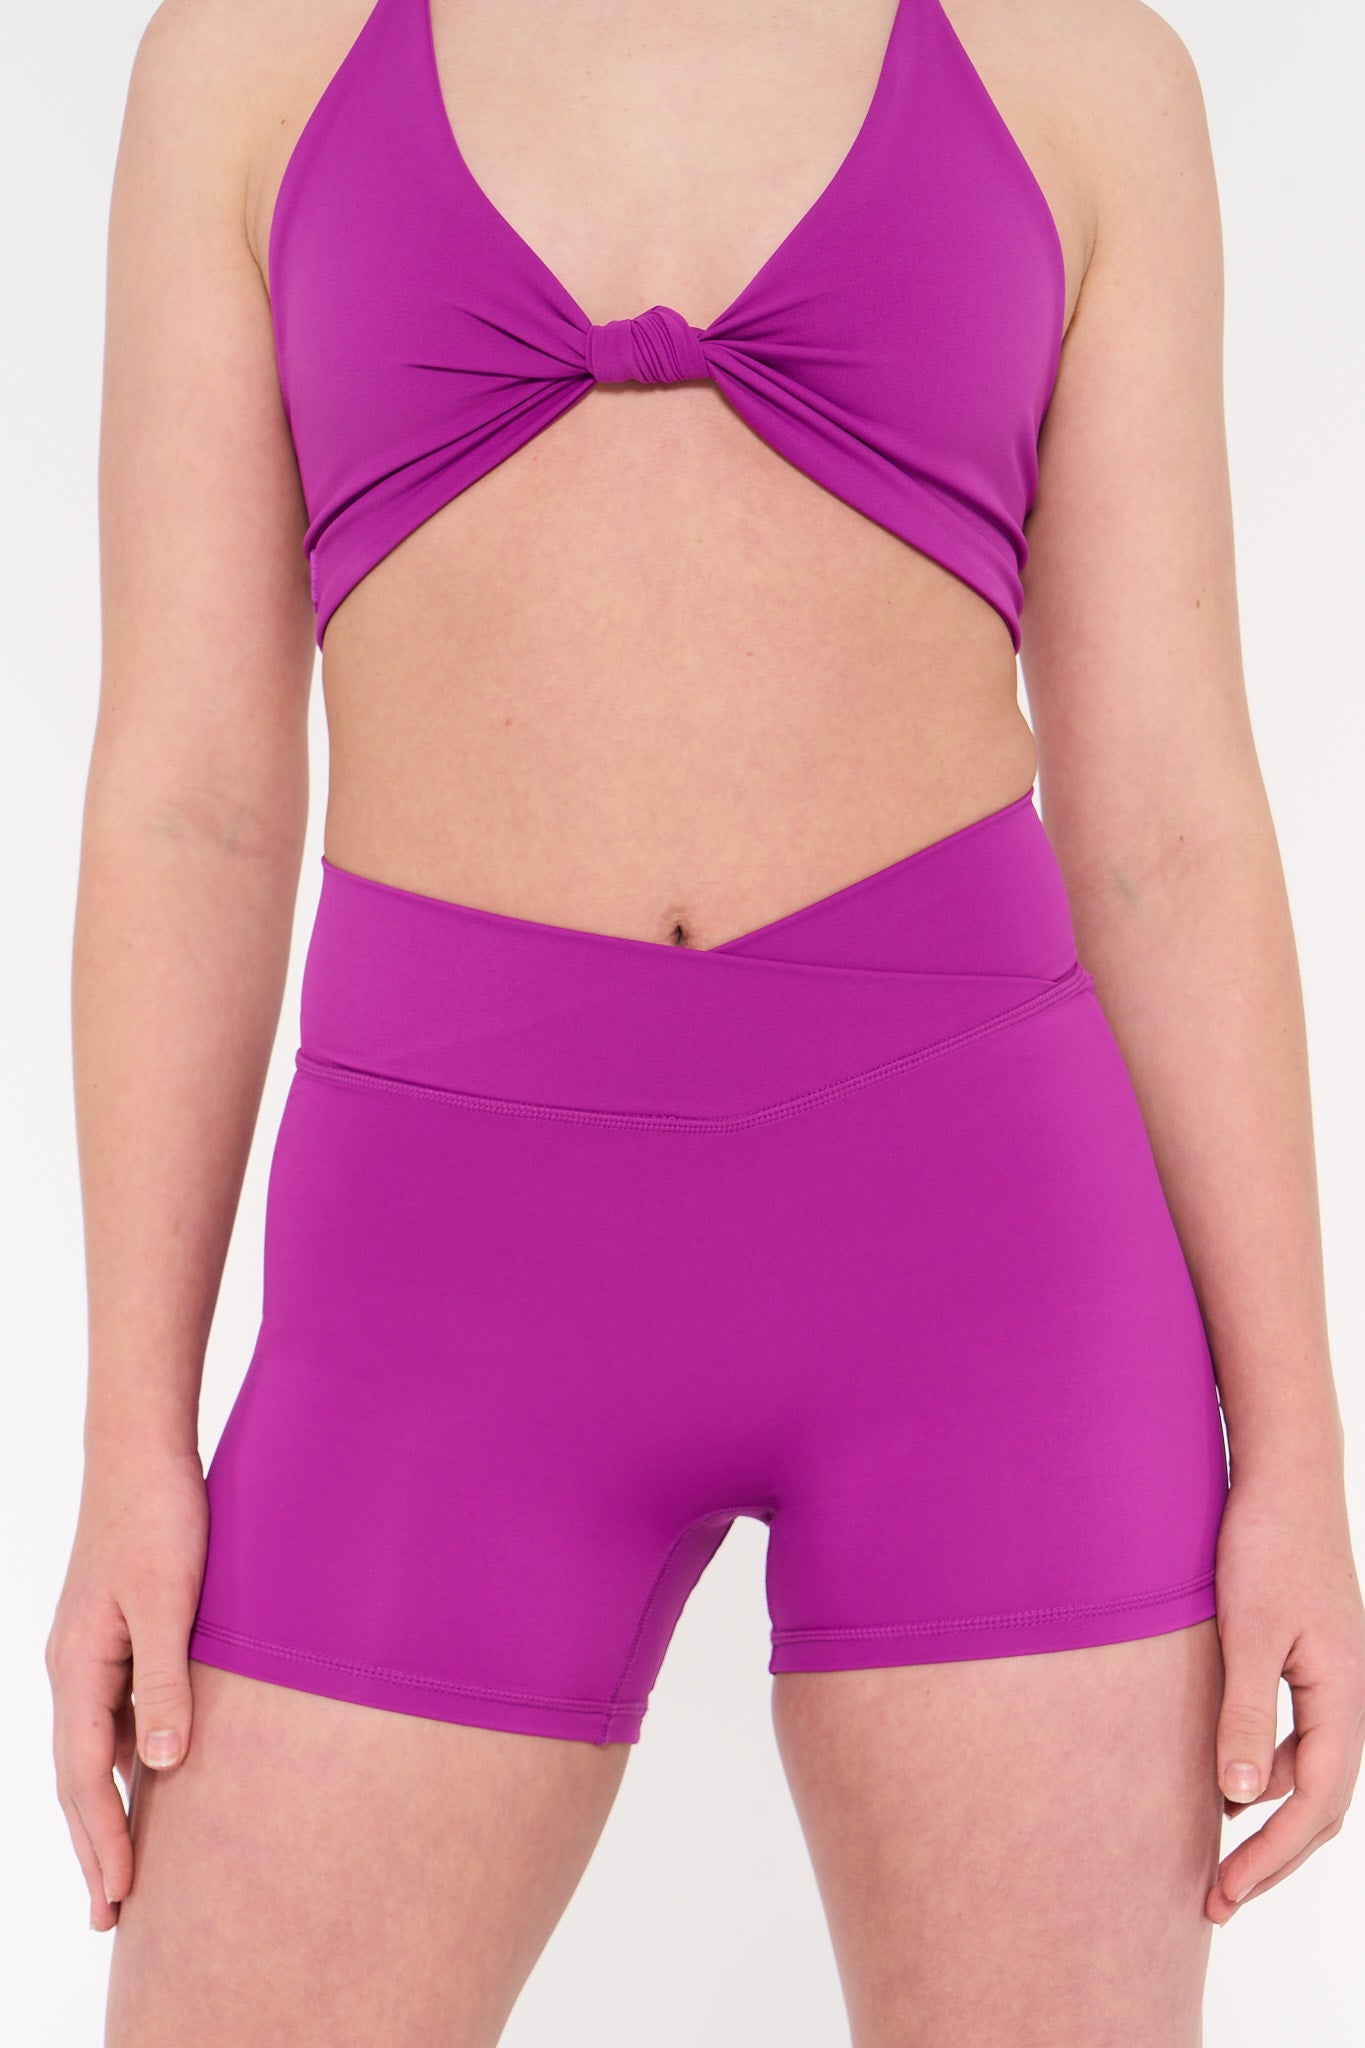 Young woman wears activewear purple v style shorts.